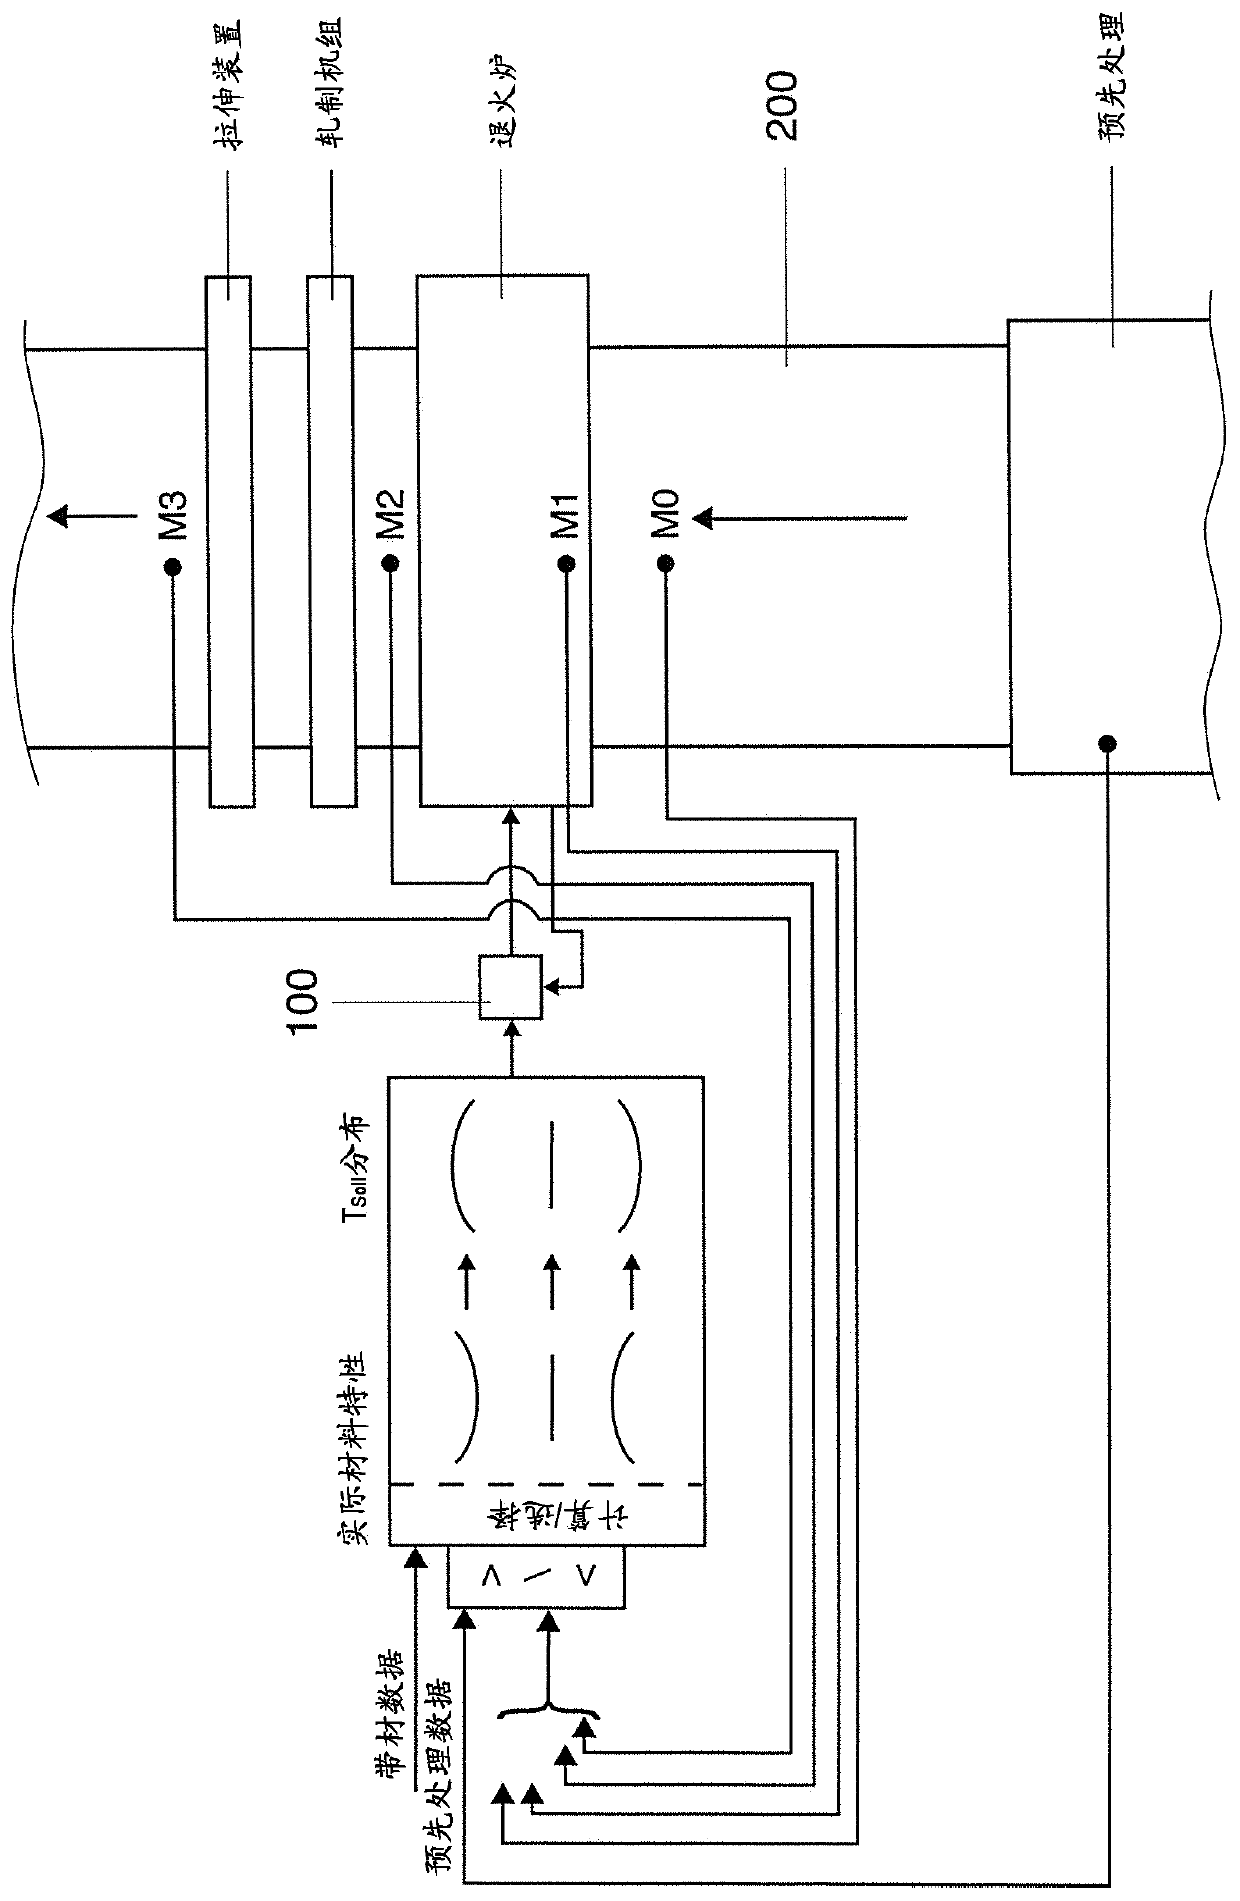 Method for operating an annealing furnace for annealing metal strip